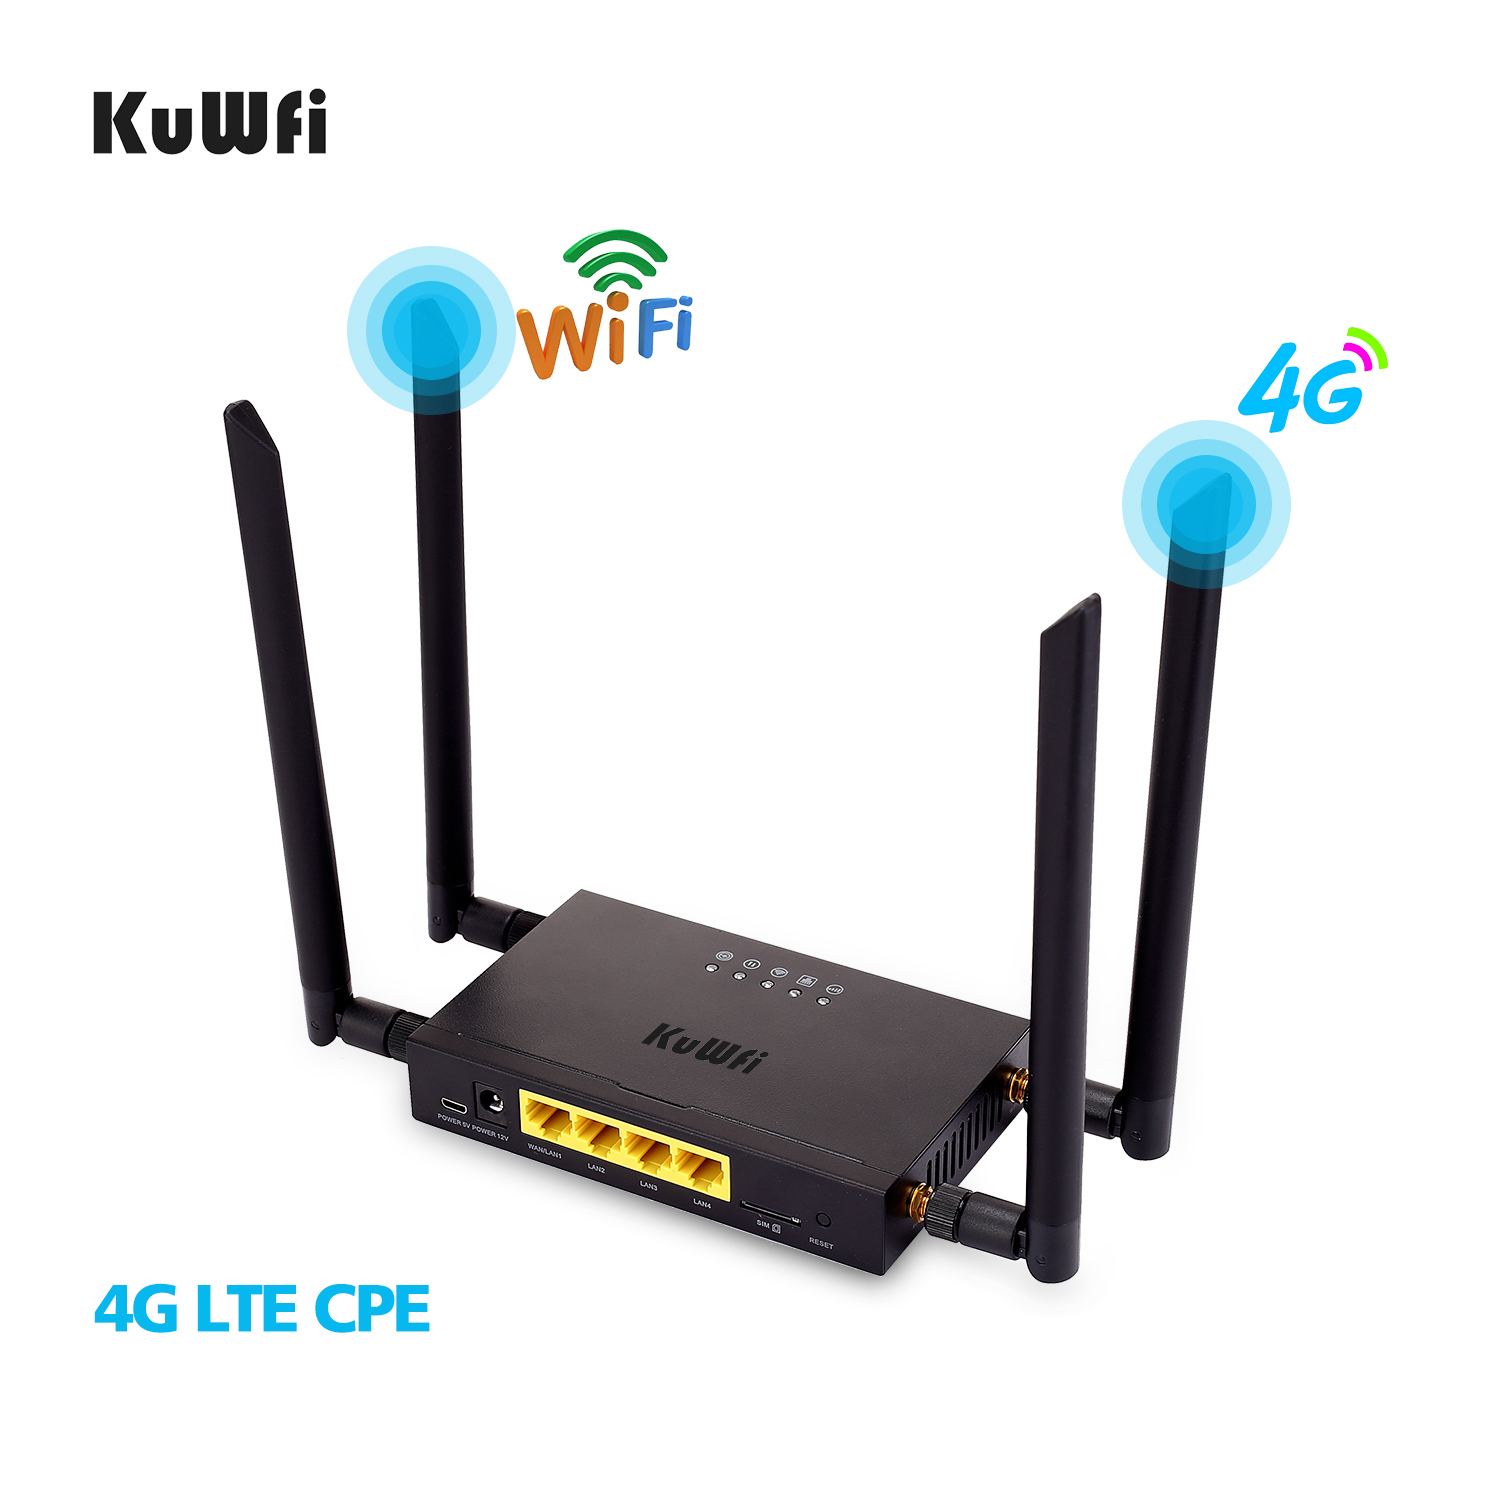 US version)KuWFi 4G LTE Car WiFi Wireless Internet Router 300Mbps